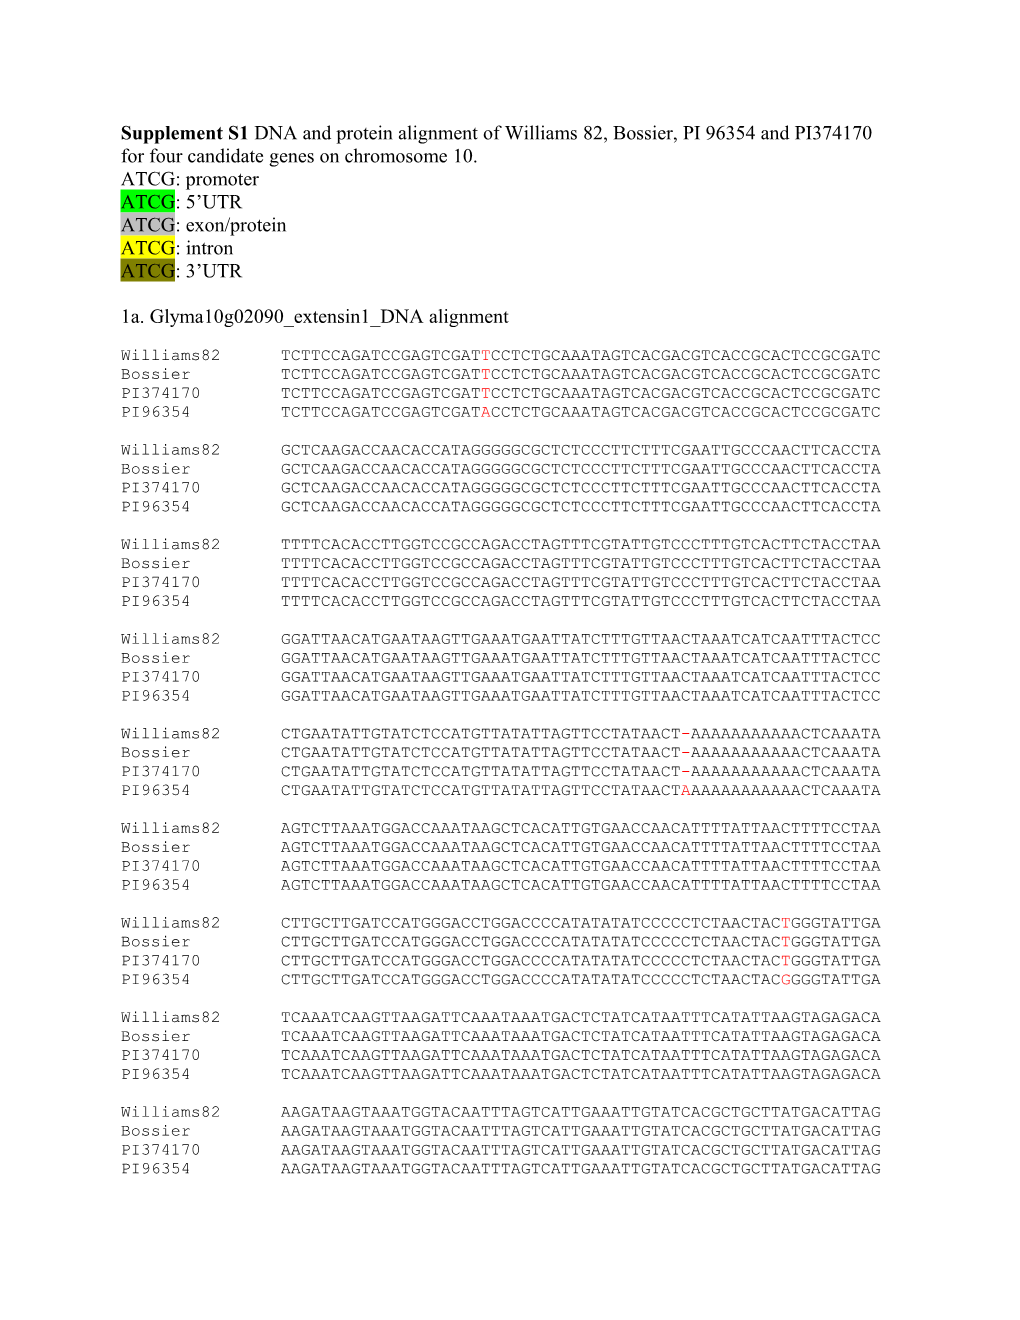 Supplement S1 DNA and Protein Alignment of Williams 82, Bossier, PI 96354 and PI374170